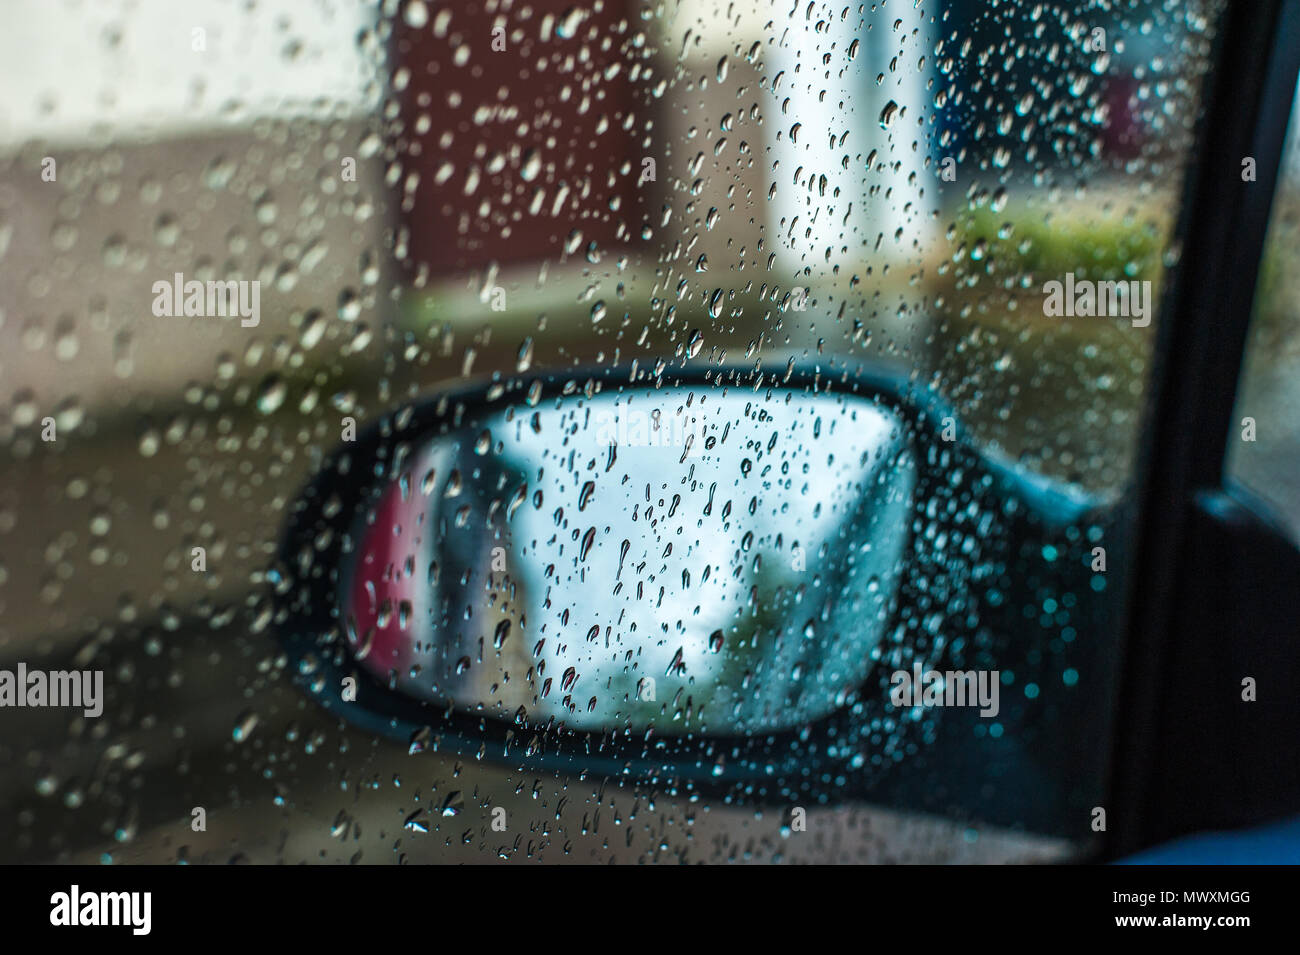 View of the car side mirror through the glass window of the car covered by rain drops Stock Photo